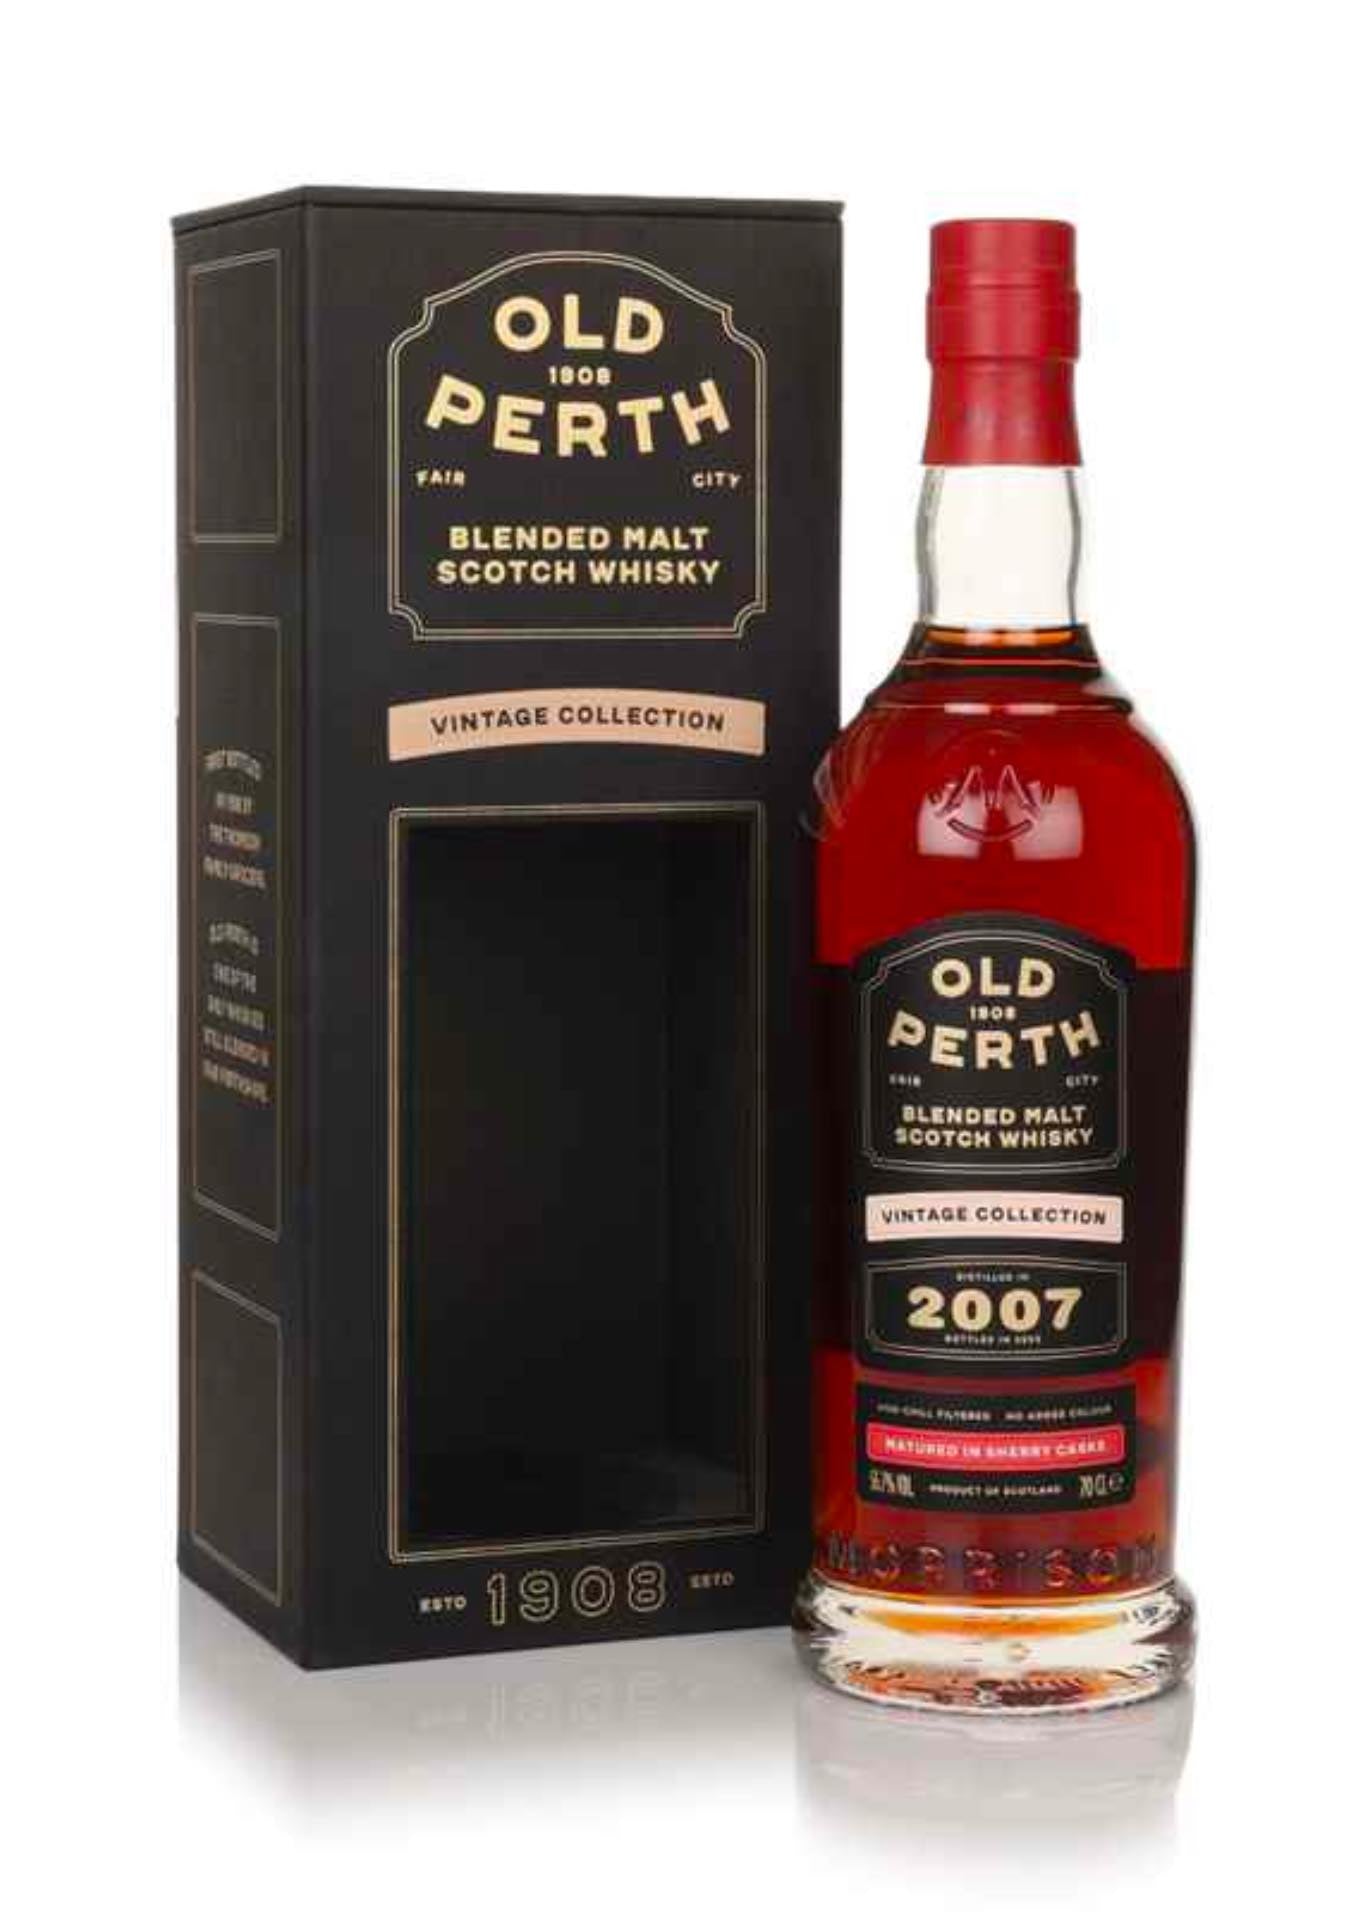 Old Perth Vintage 2007 Sherry Cask Whisky